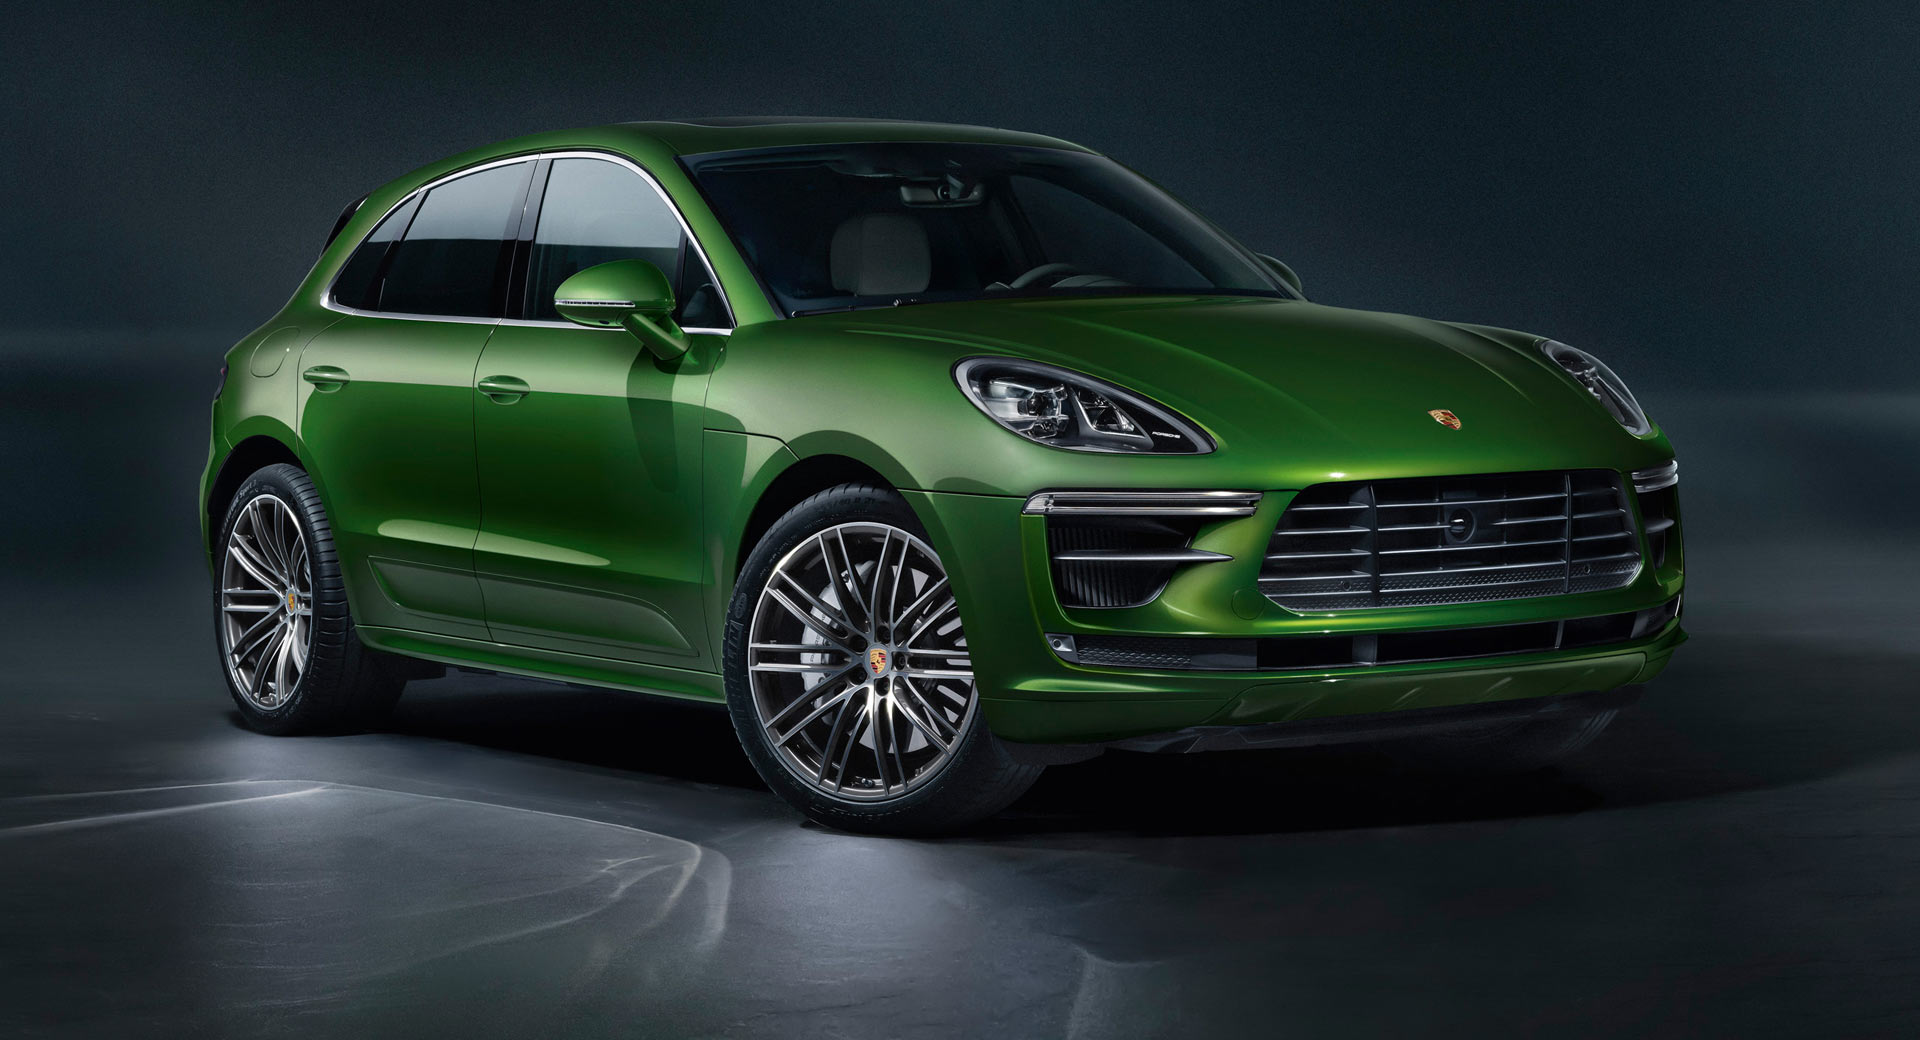 Tested The 2019 Porsche Macan S is a WellBalanced Performance SUV